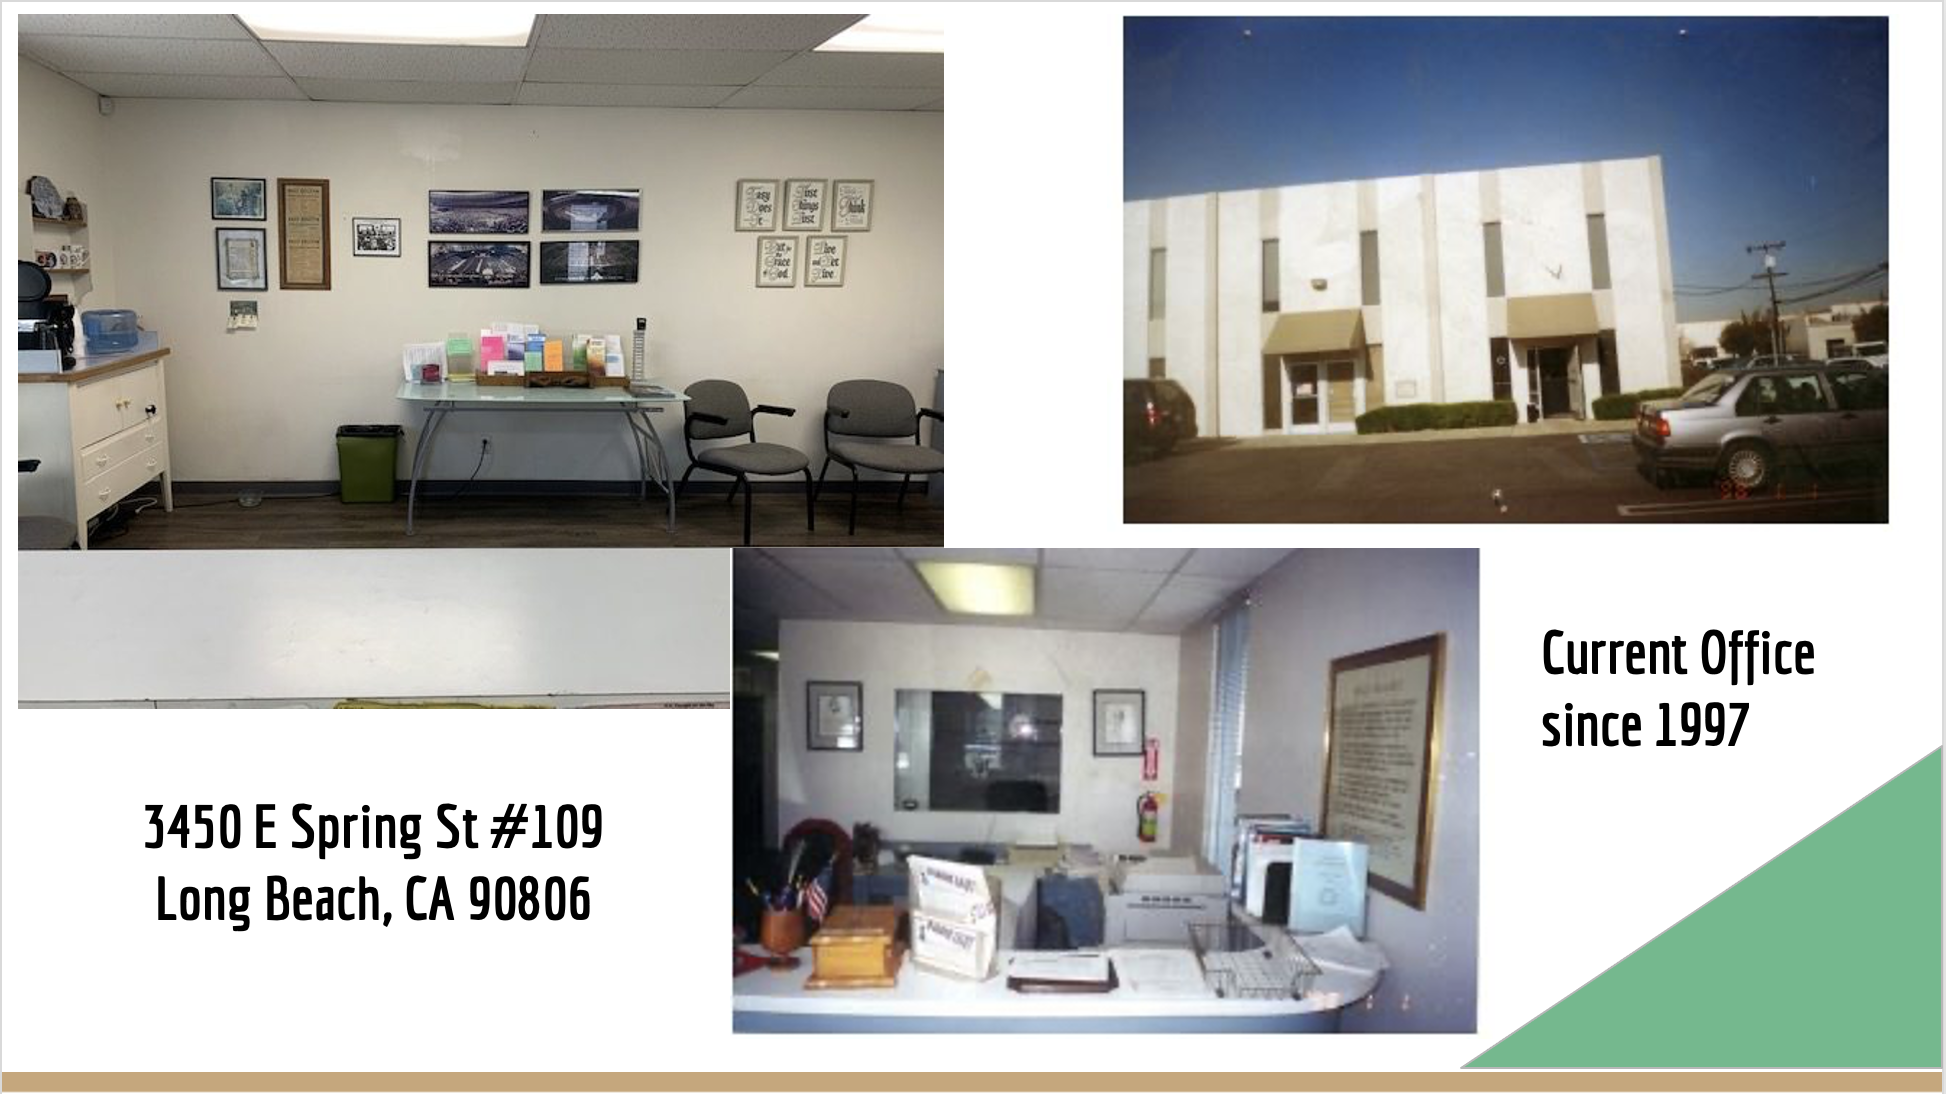 picture of inside and outside of central office building plus address of 3450 e spring street number 109 long beach, california 90806 and the words current office since 1997